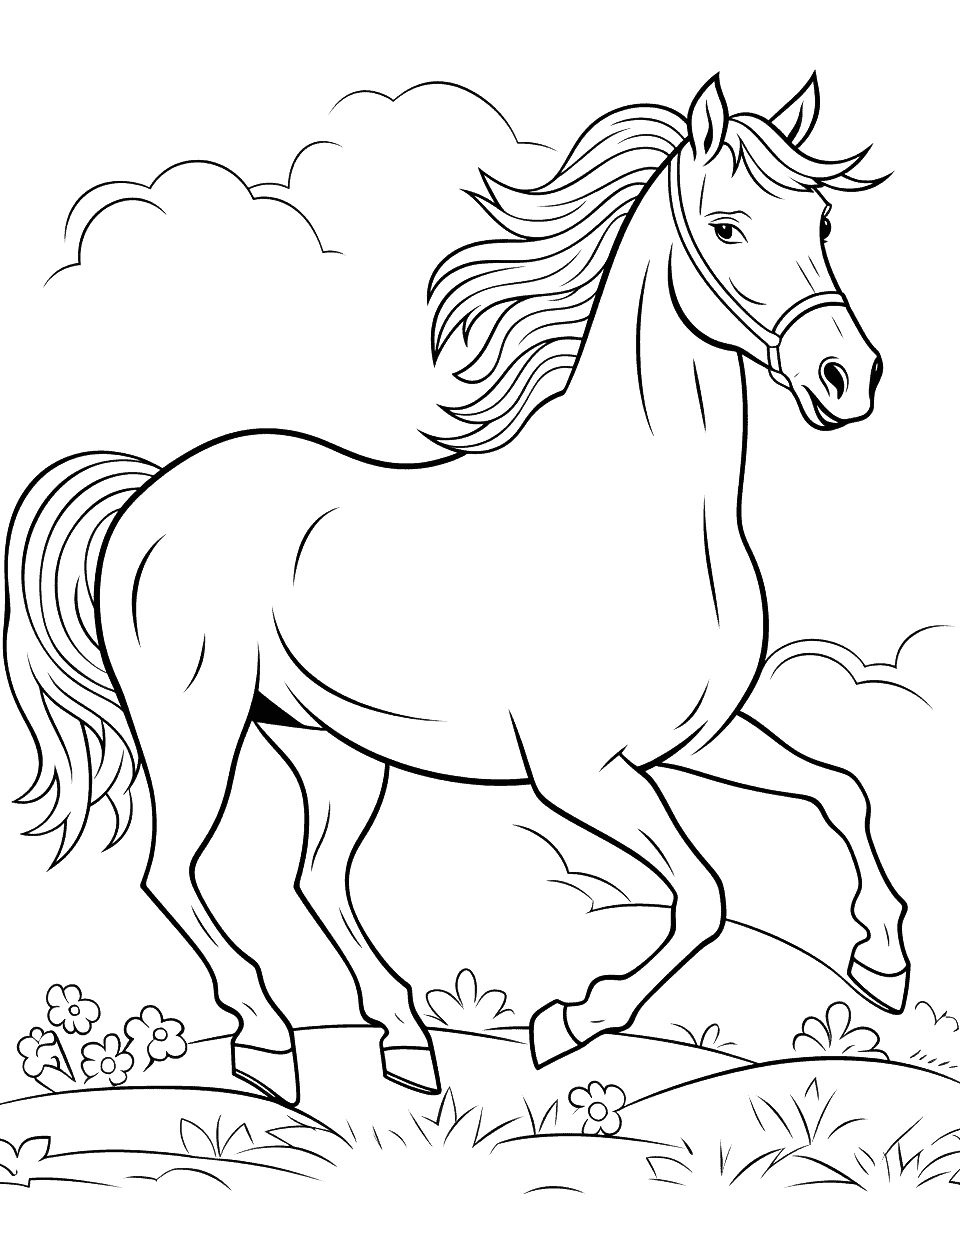 Stunning Paint Horse Coloring Page - A stunning Paint horse trotting across a meadow.